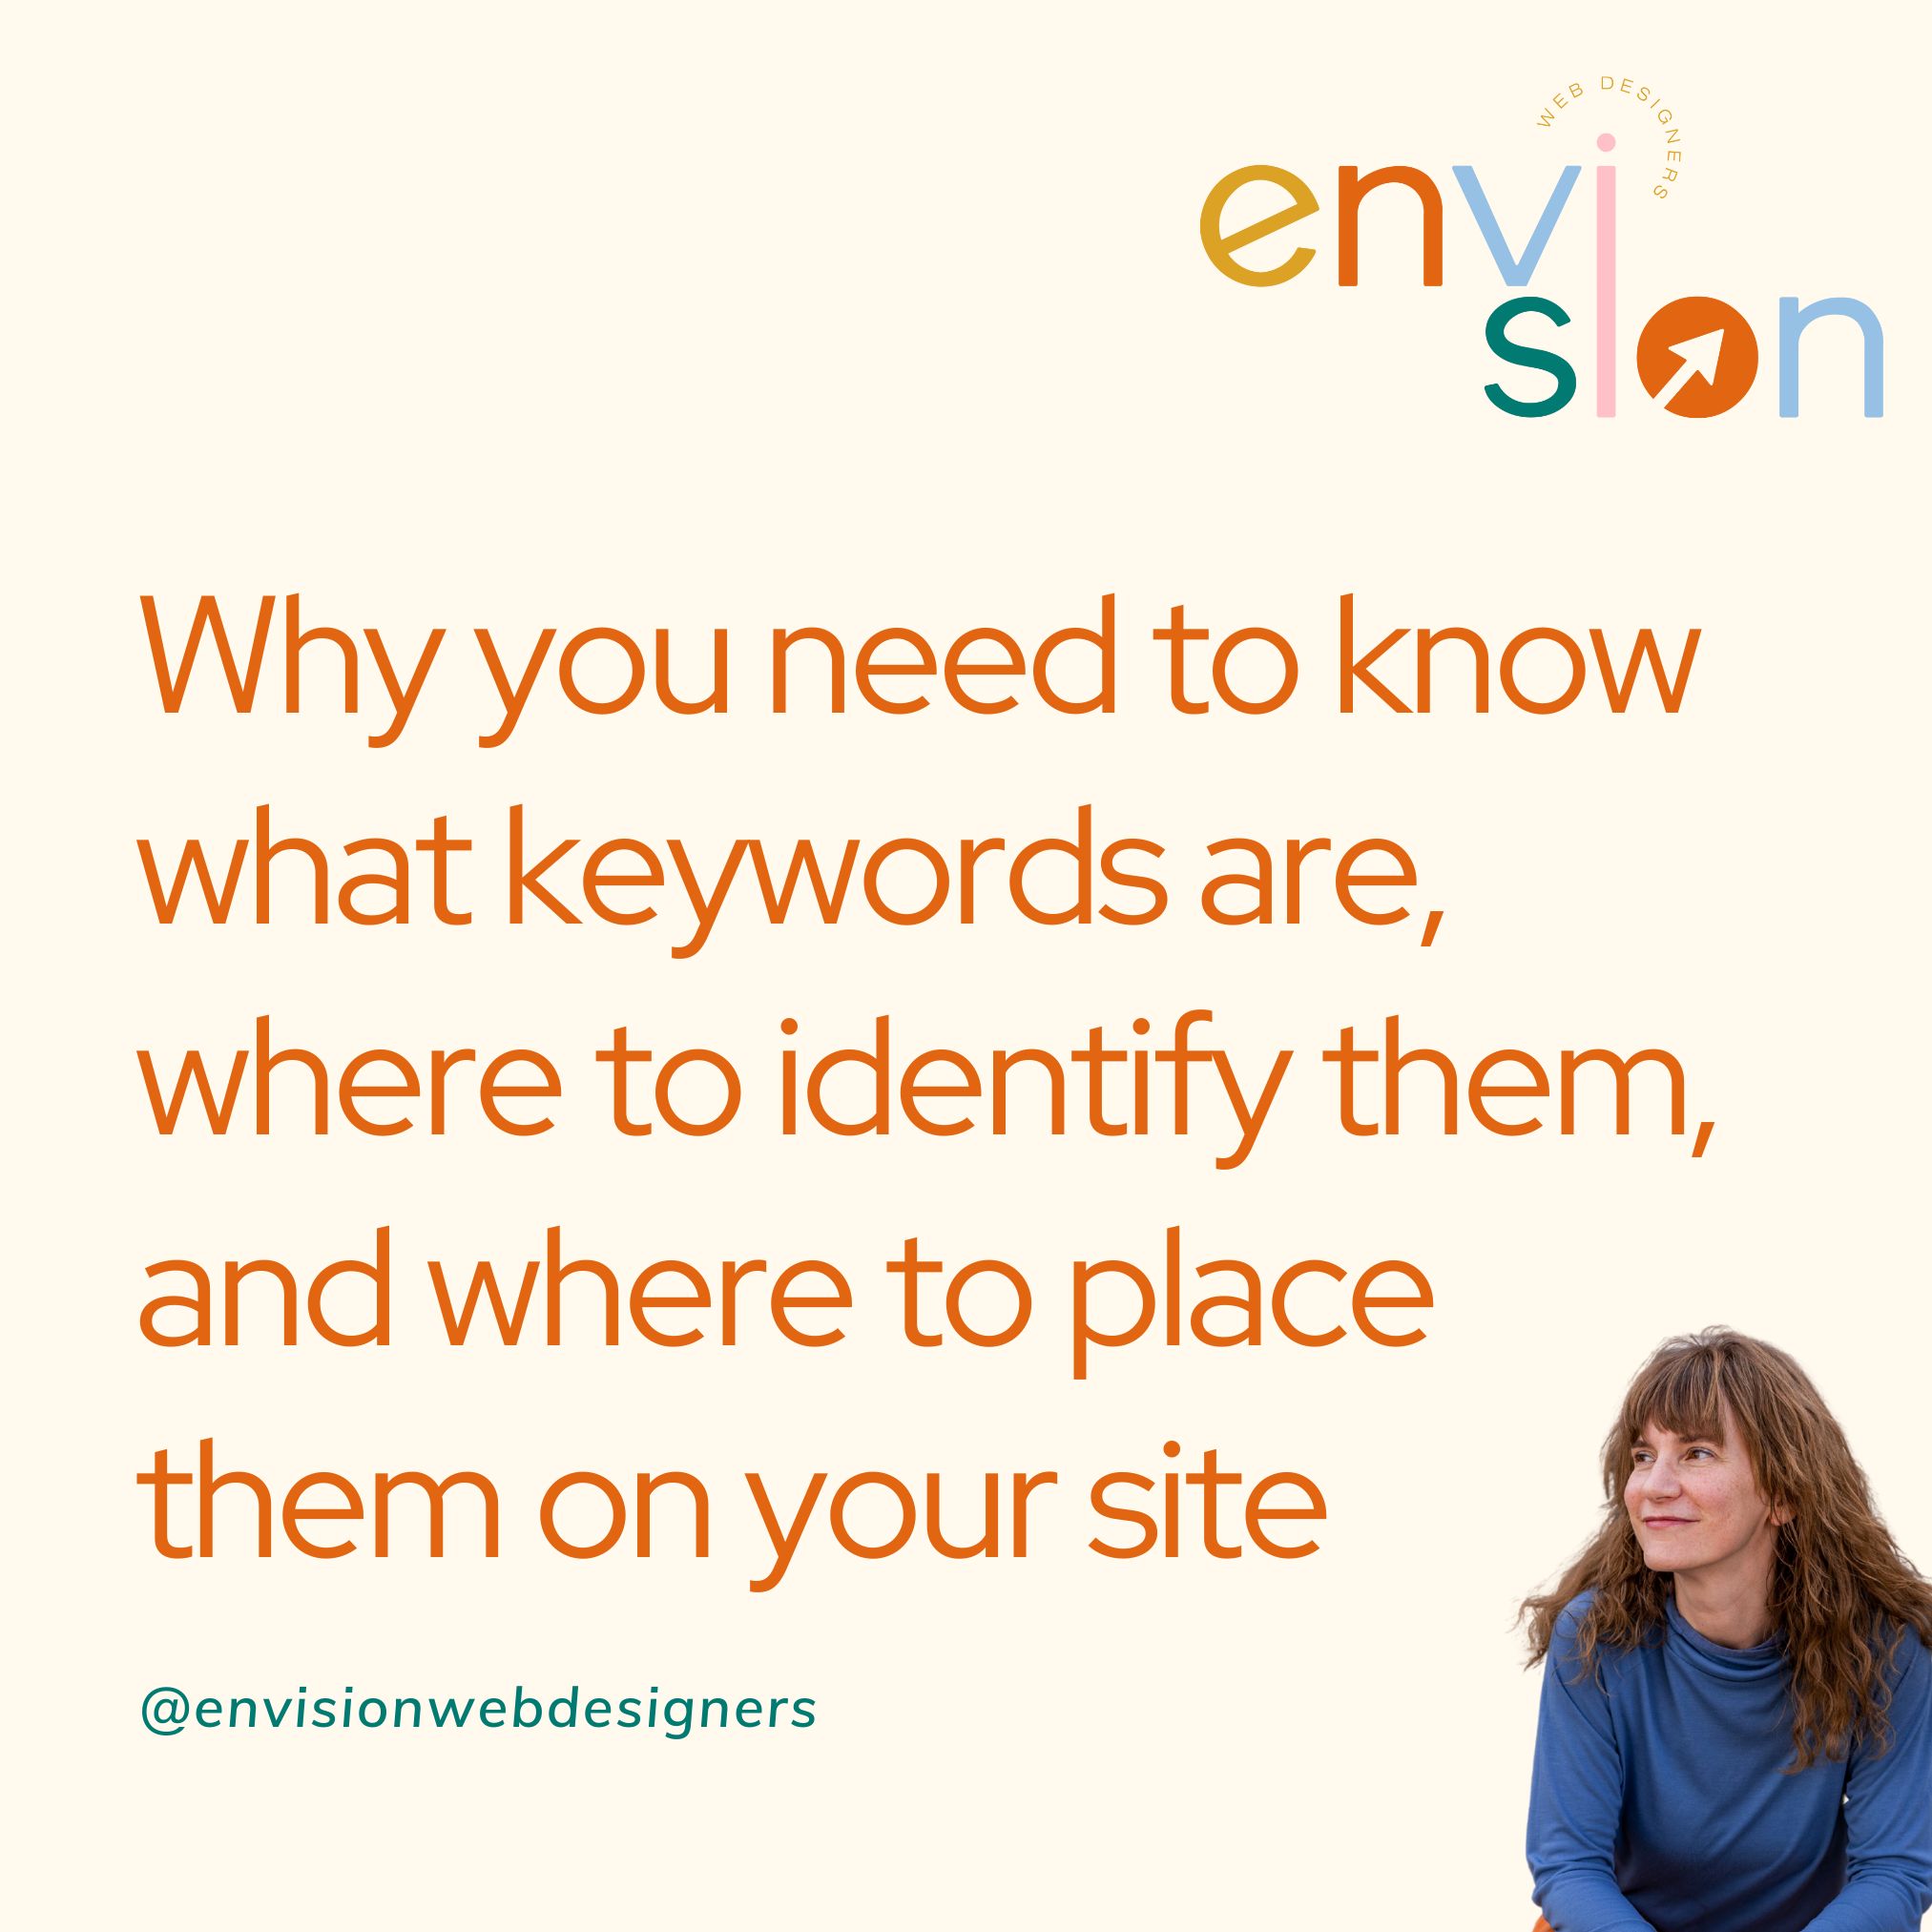 Envision Web Designers Salida - Custom Website Designs, Hosting and Organic SEO - what is keyword research and how to do it?